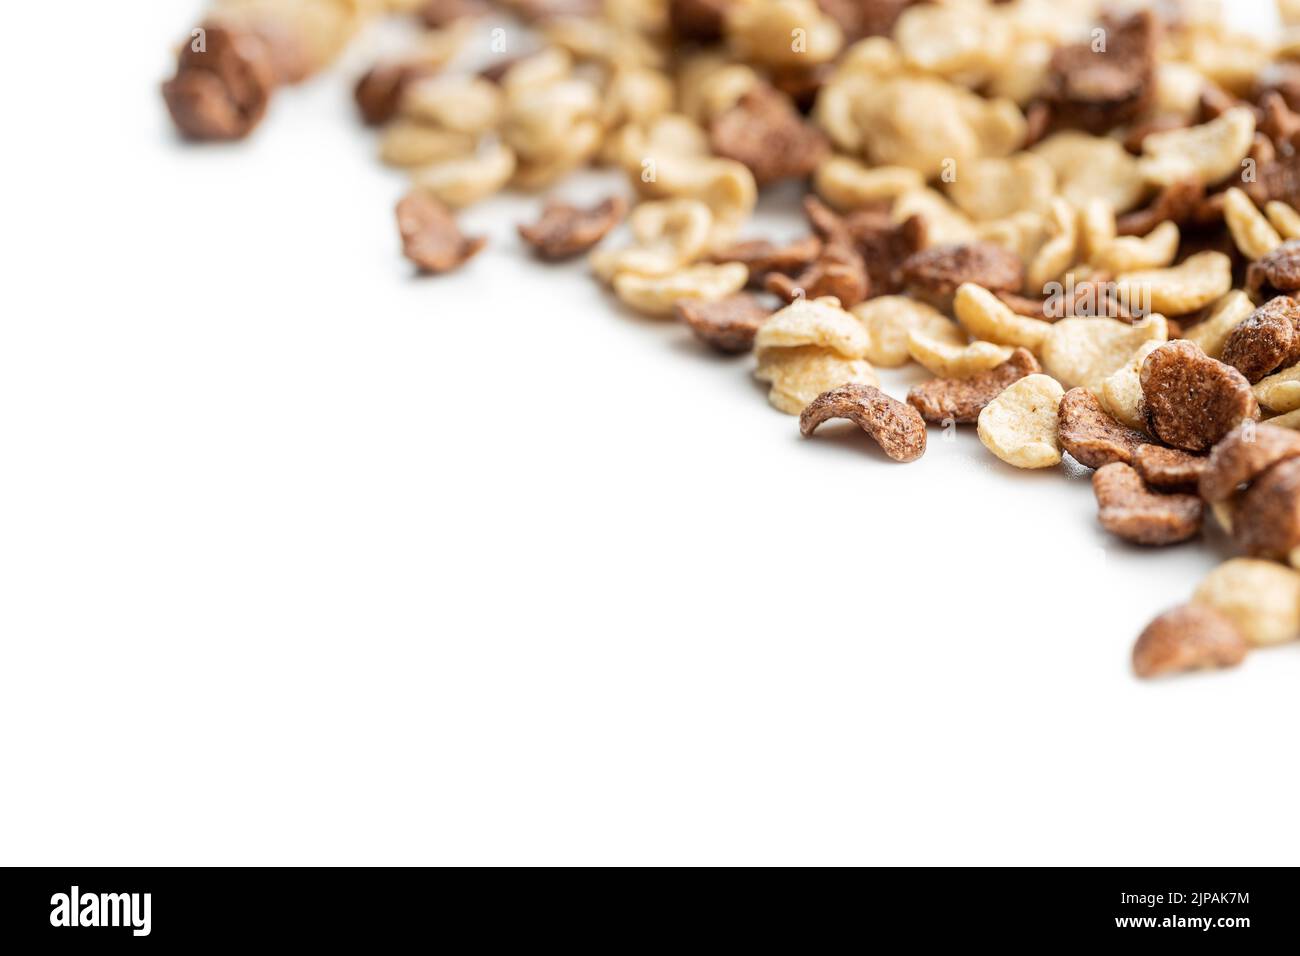 Breakfast cereal flakes isolated on a white background. Stock Photo